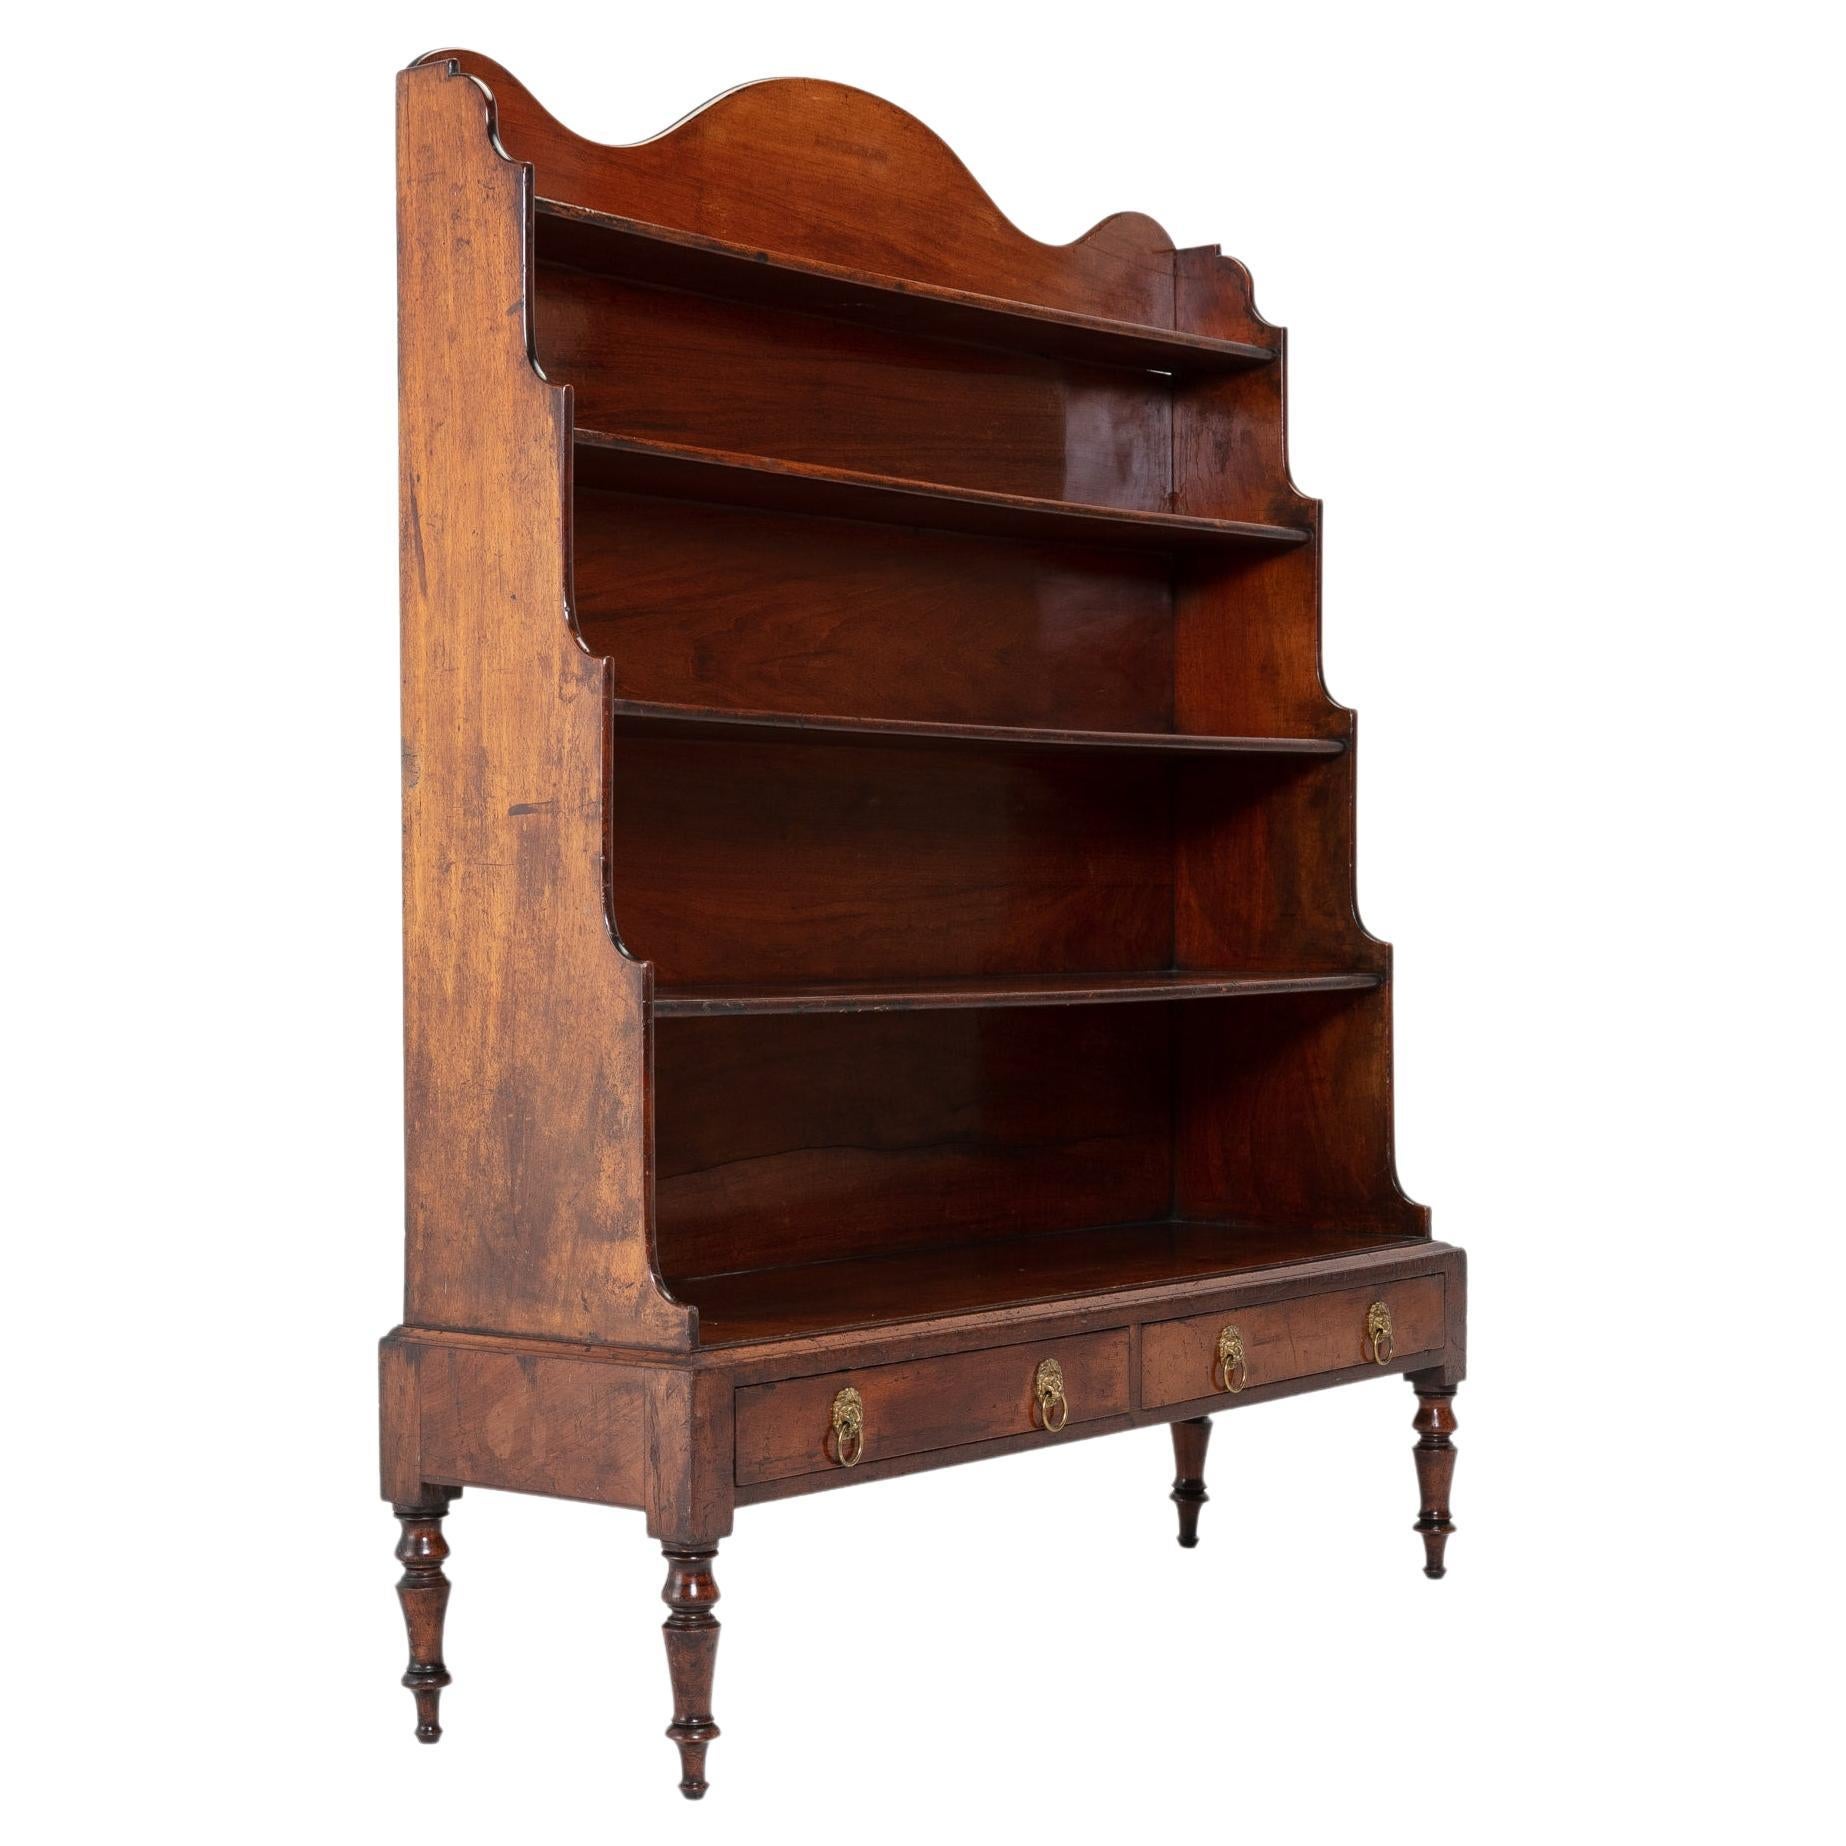 Large Scale 19th Century Regency Mahogany Waterfall Bookcase For Sale